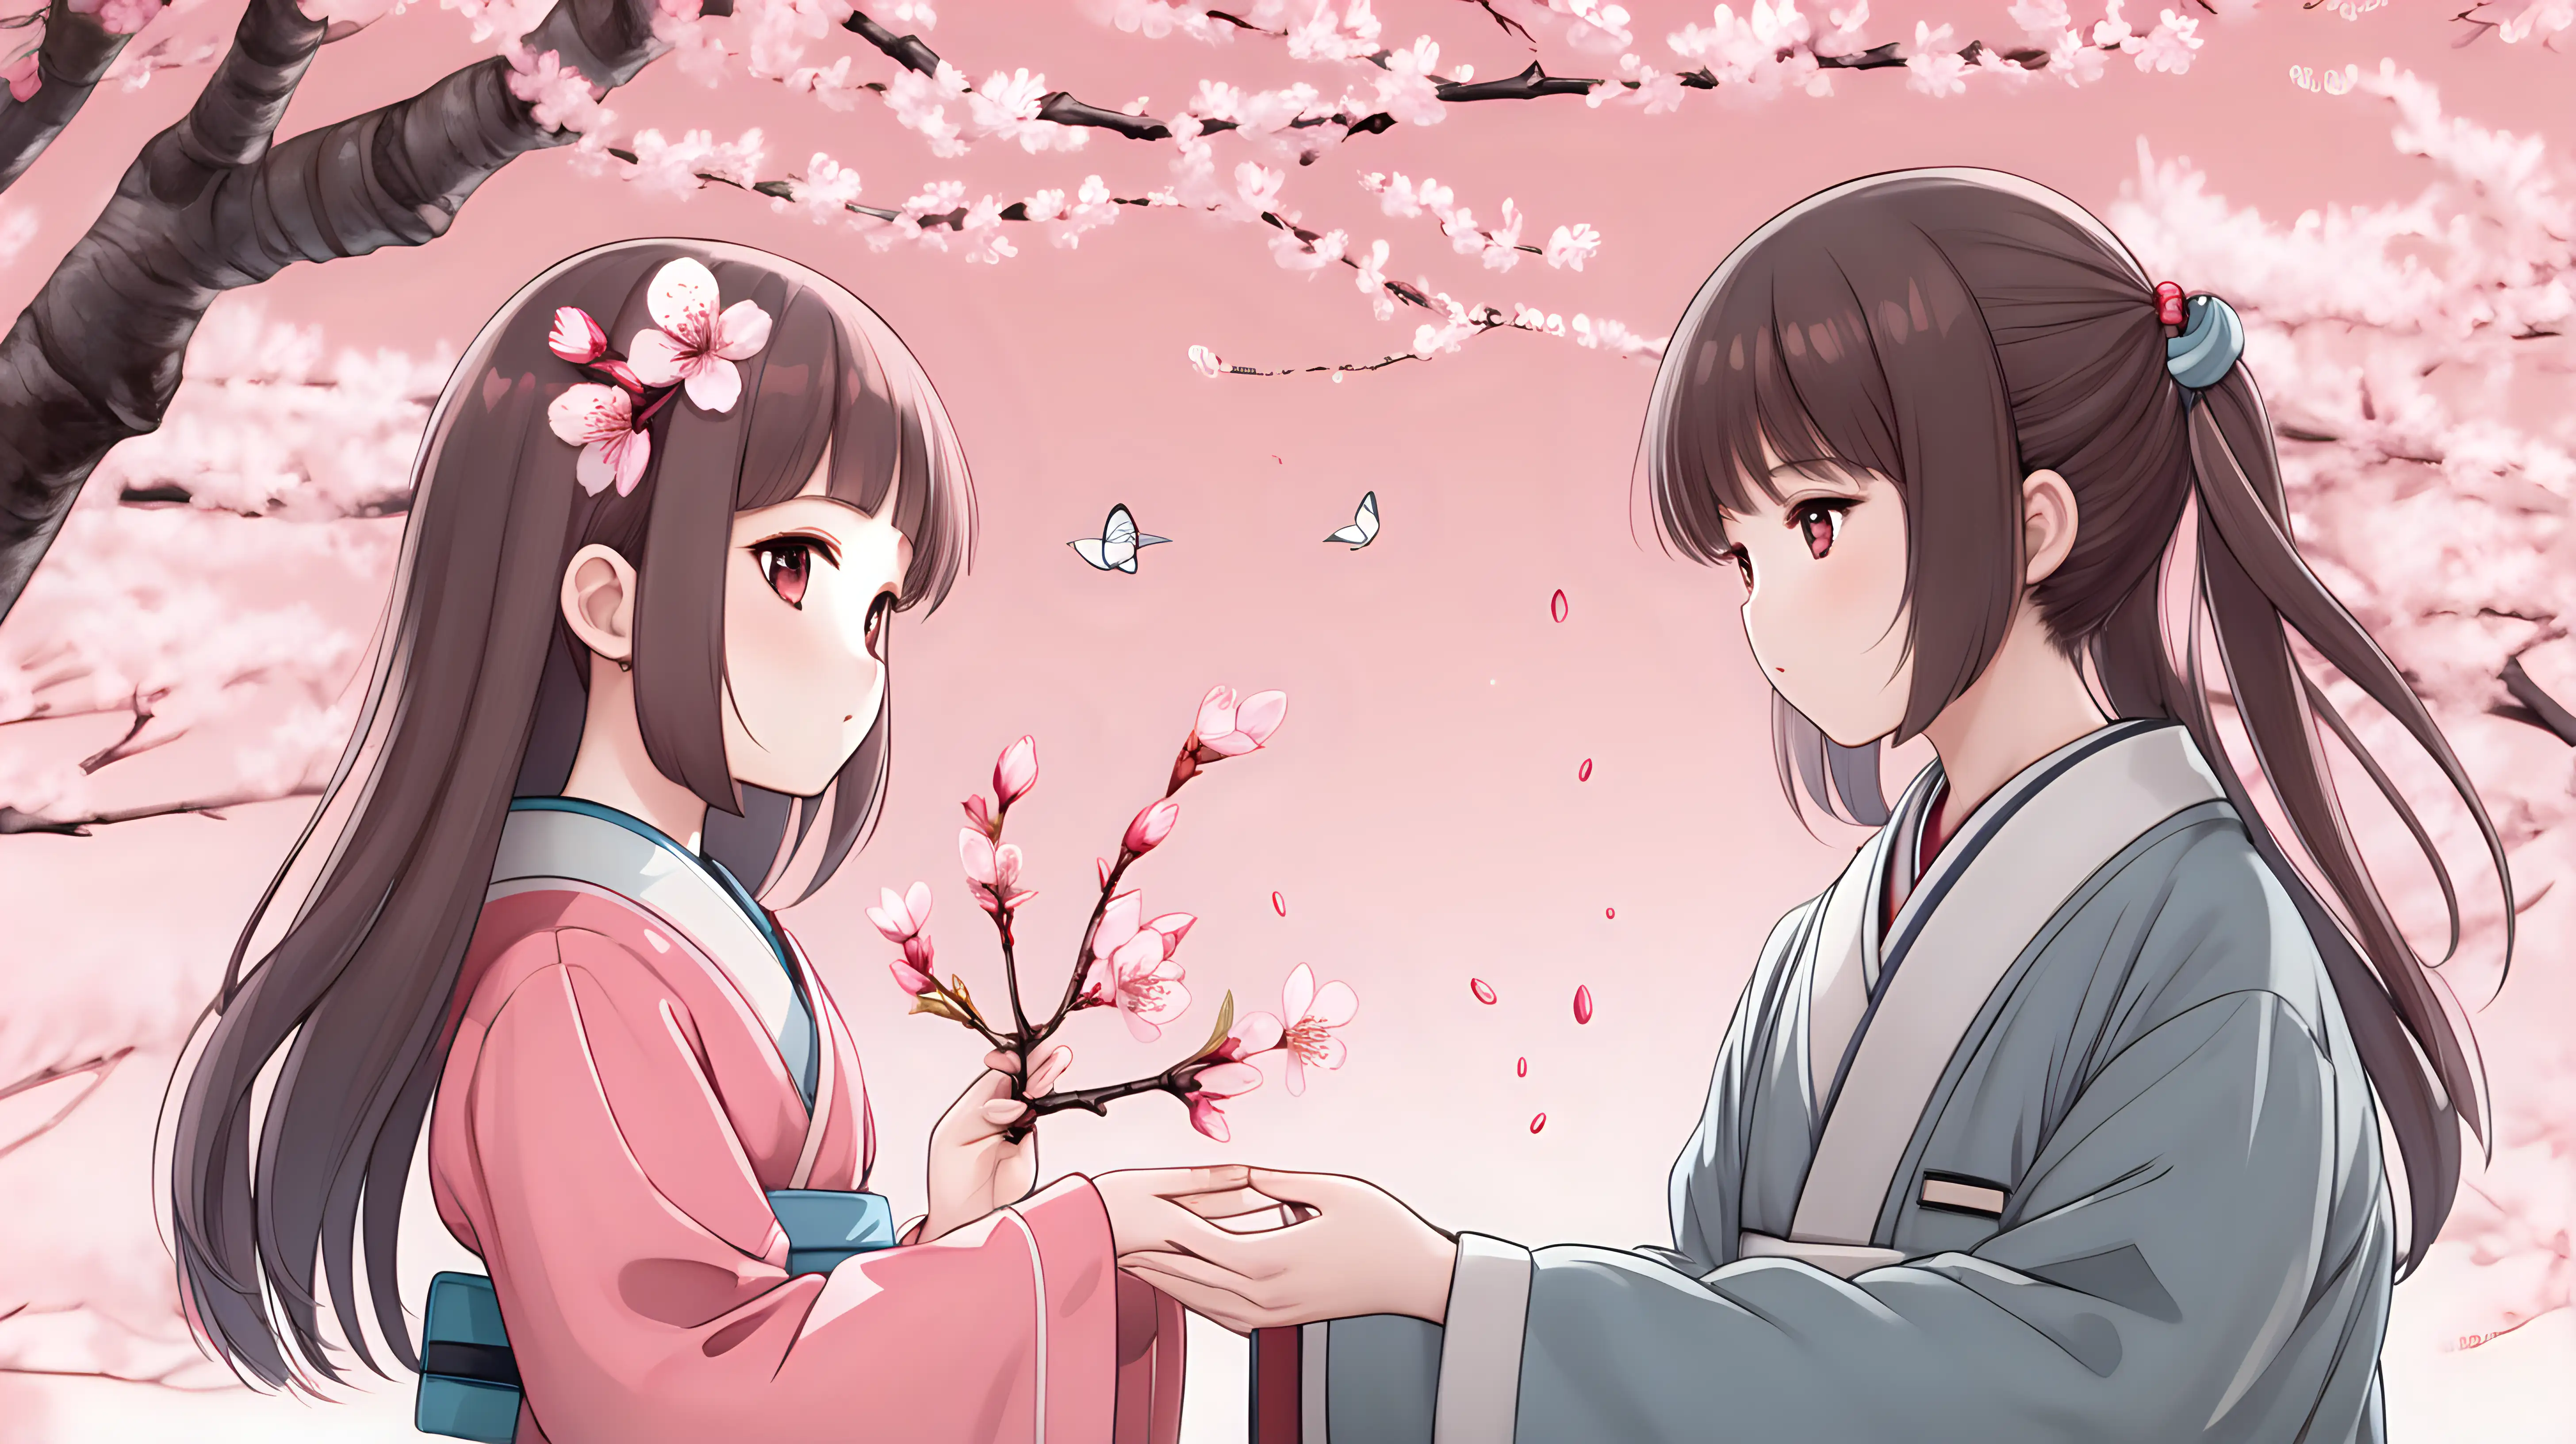 A cute character presenting a girl with a single blooming cherry blossom, symbolizing love and purity.